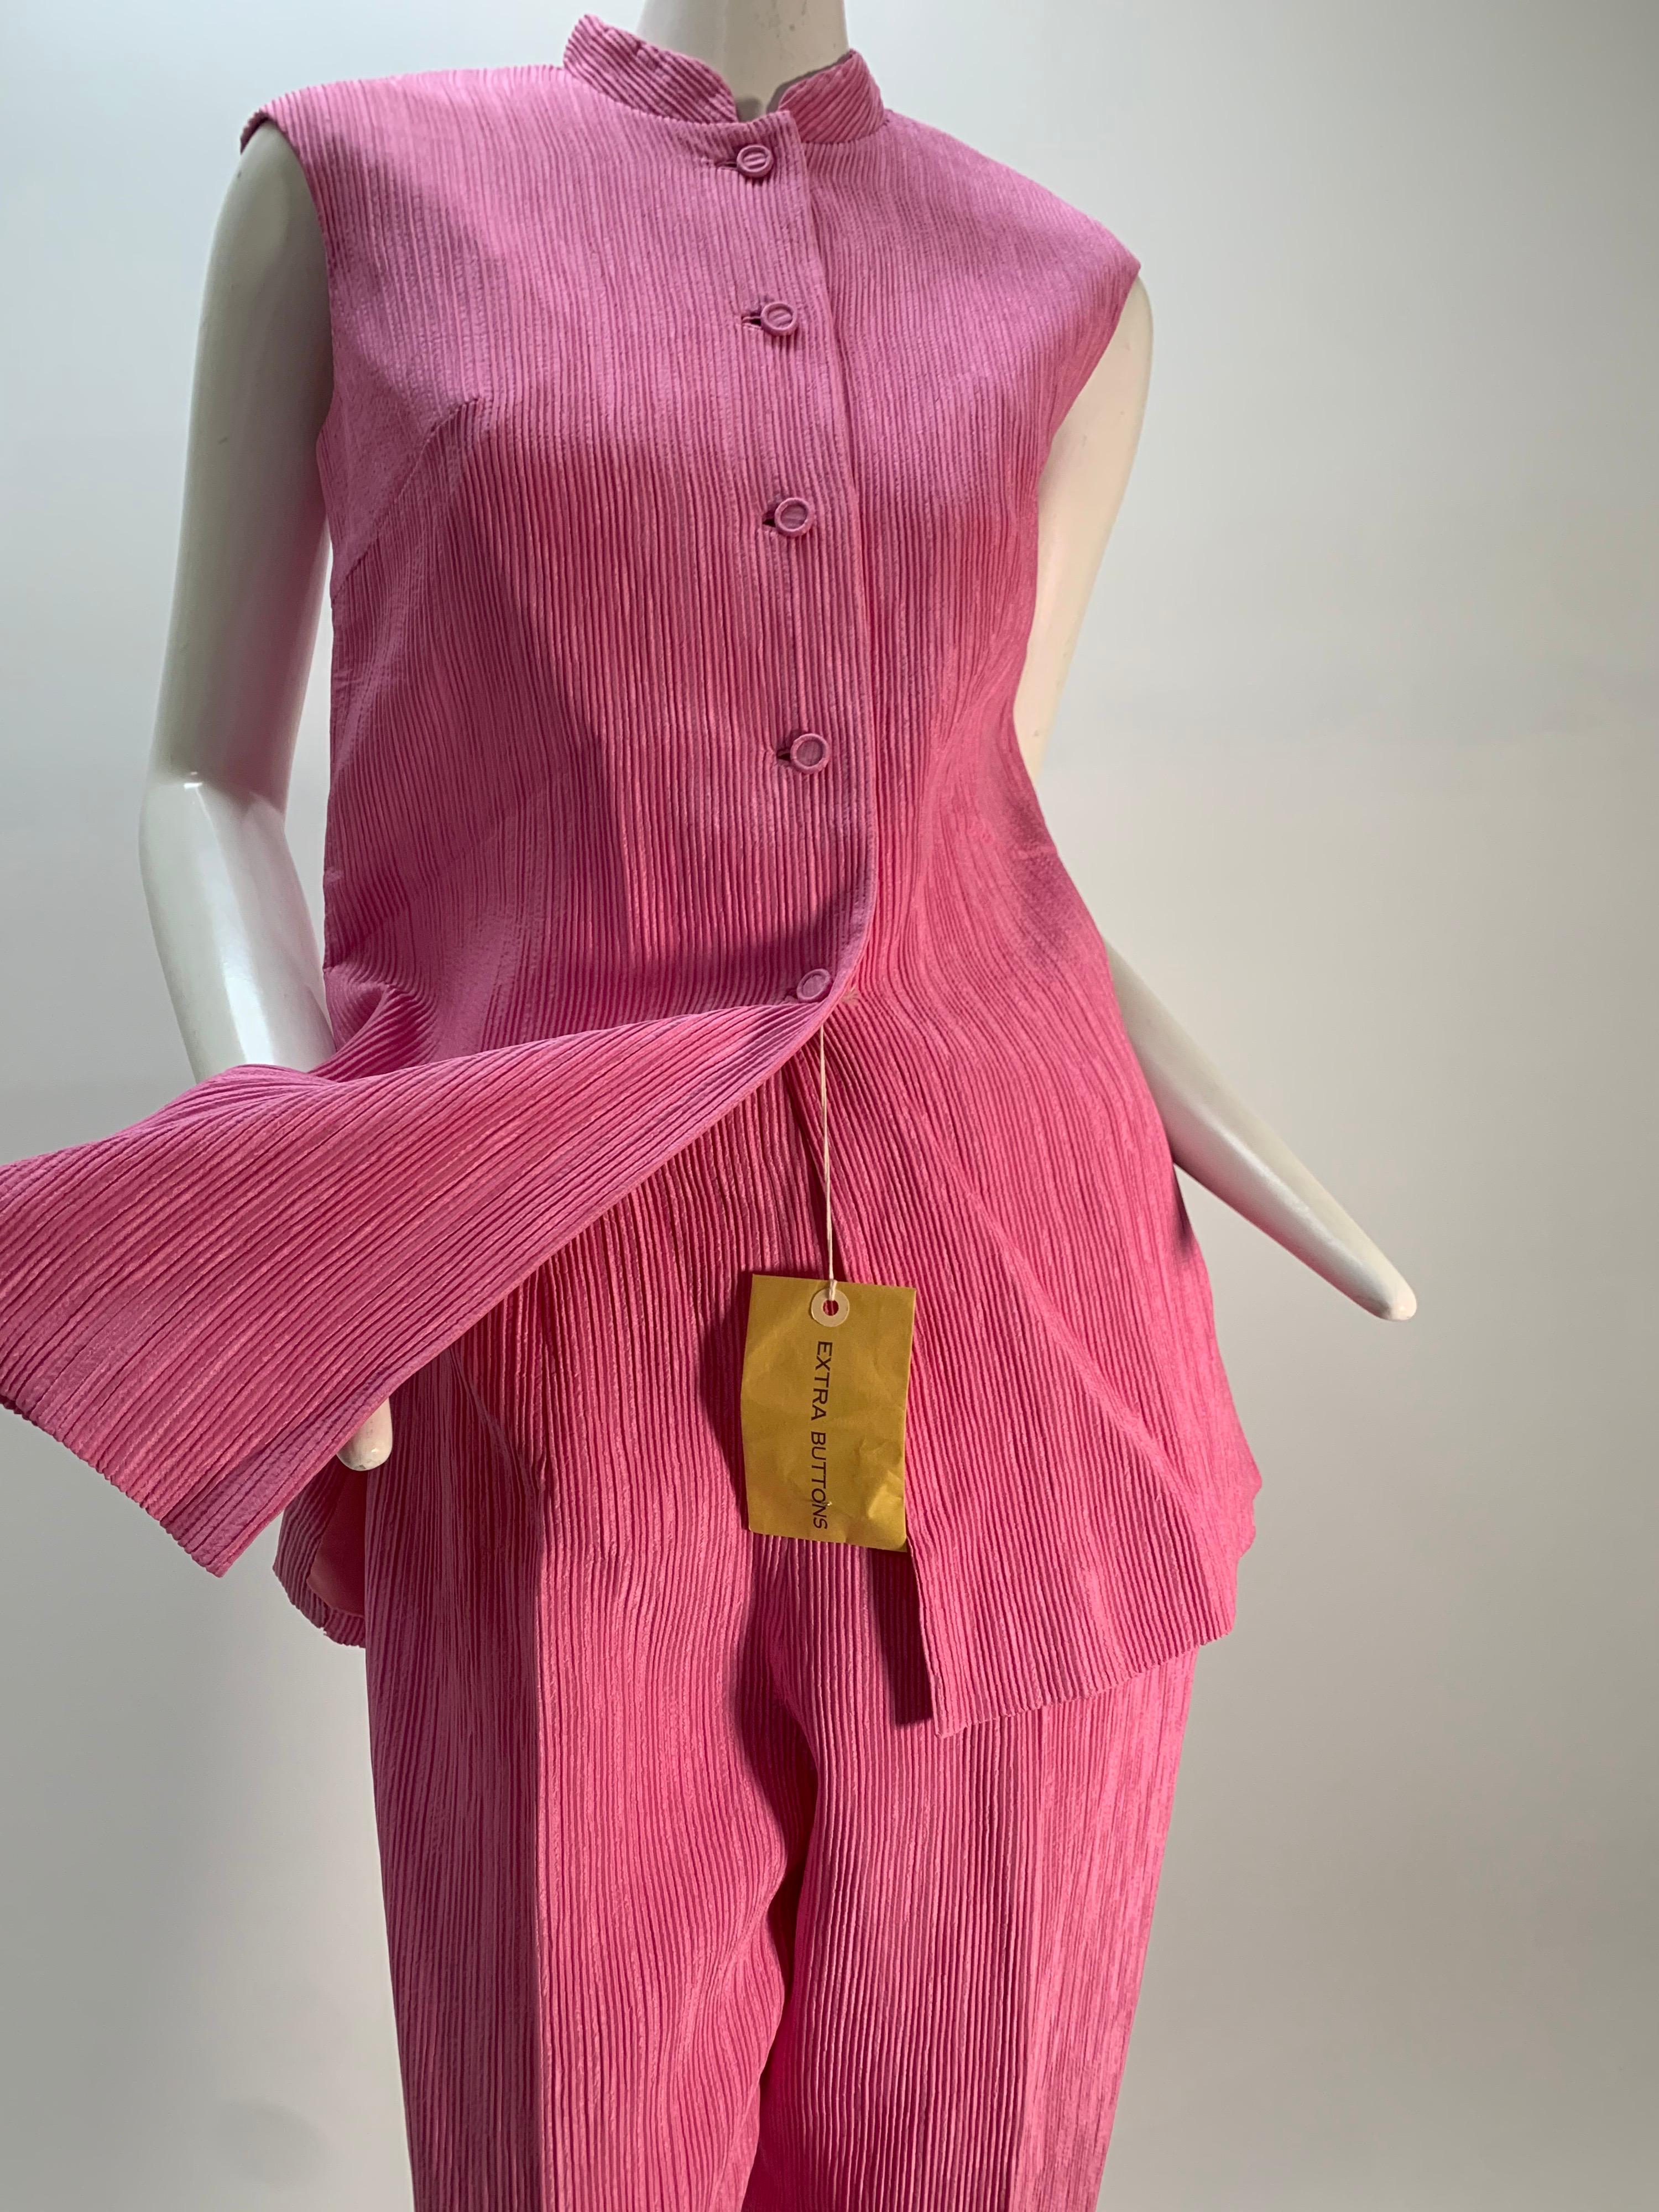 1960 Saks Pink Crinkle Capri Pant & Nehru Tunic Ensemble: Button-up tunic top and pants are made of a permanently and closely pleated fabric. Fully lined. Never worn, with original tag. 